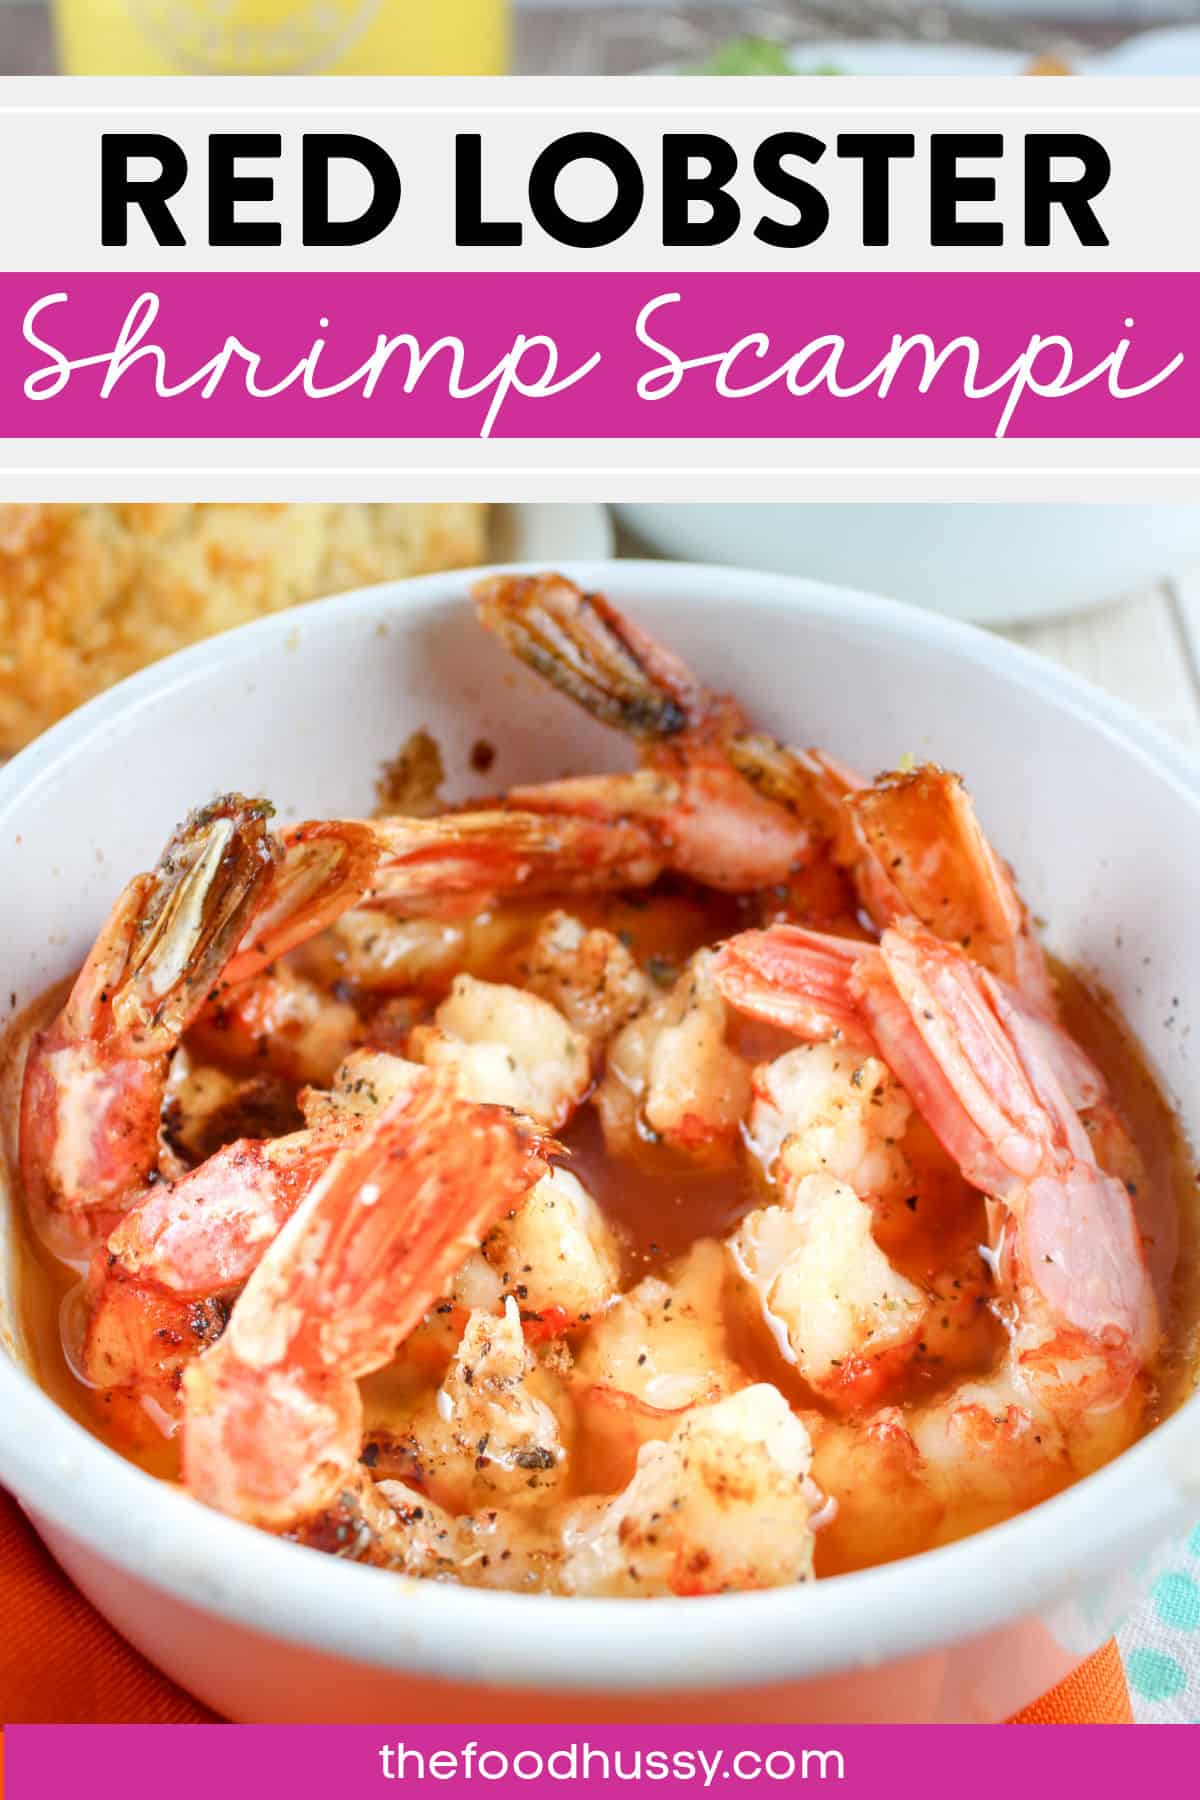 The Famous Red Lobster Shrimp Scampi has always been one of my favorite dishes! I was shocked at how easy it was to make it at home! This copycat version is full of garlicky buttery goodness and even better than the restaurant version!  via @foodhussy